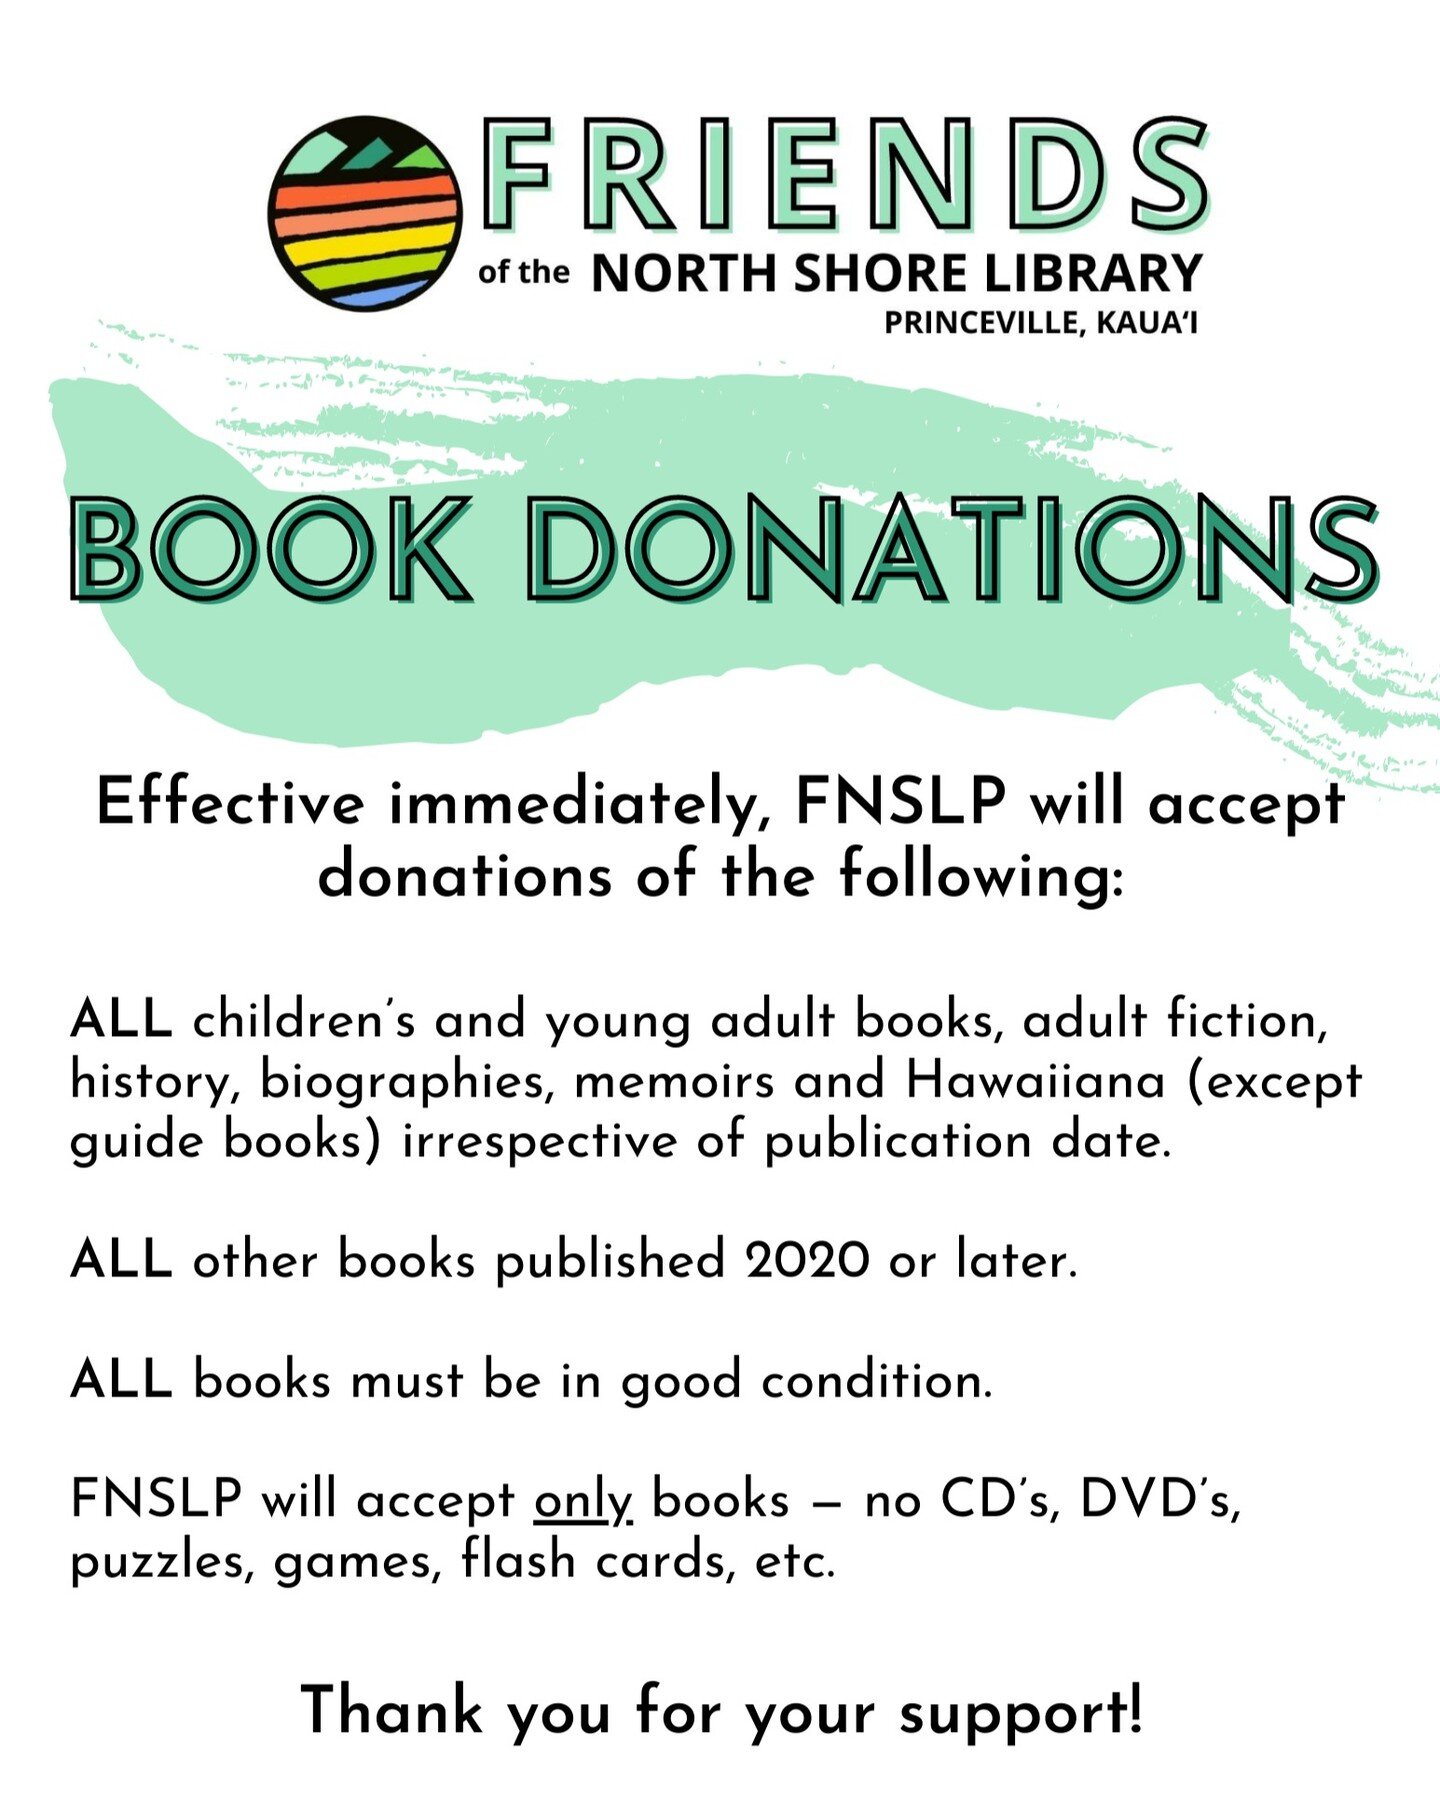 New year, new donation policy!

In an effort to streamline donation sorting and offer the highest quality book selection, the Friends of the North Shore Library has updated its book donation policy.

We appreciate your contributions and continued sup